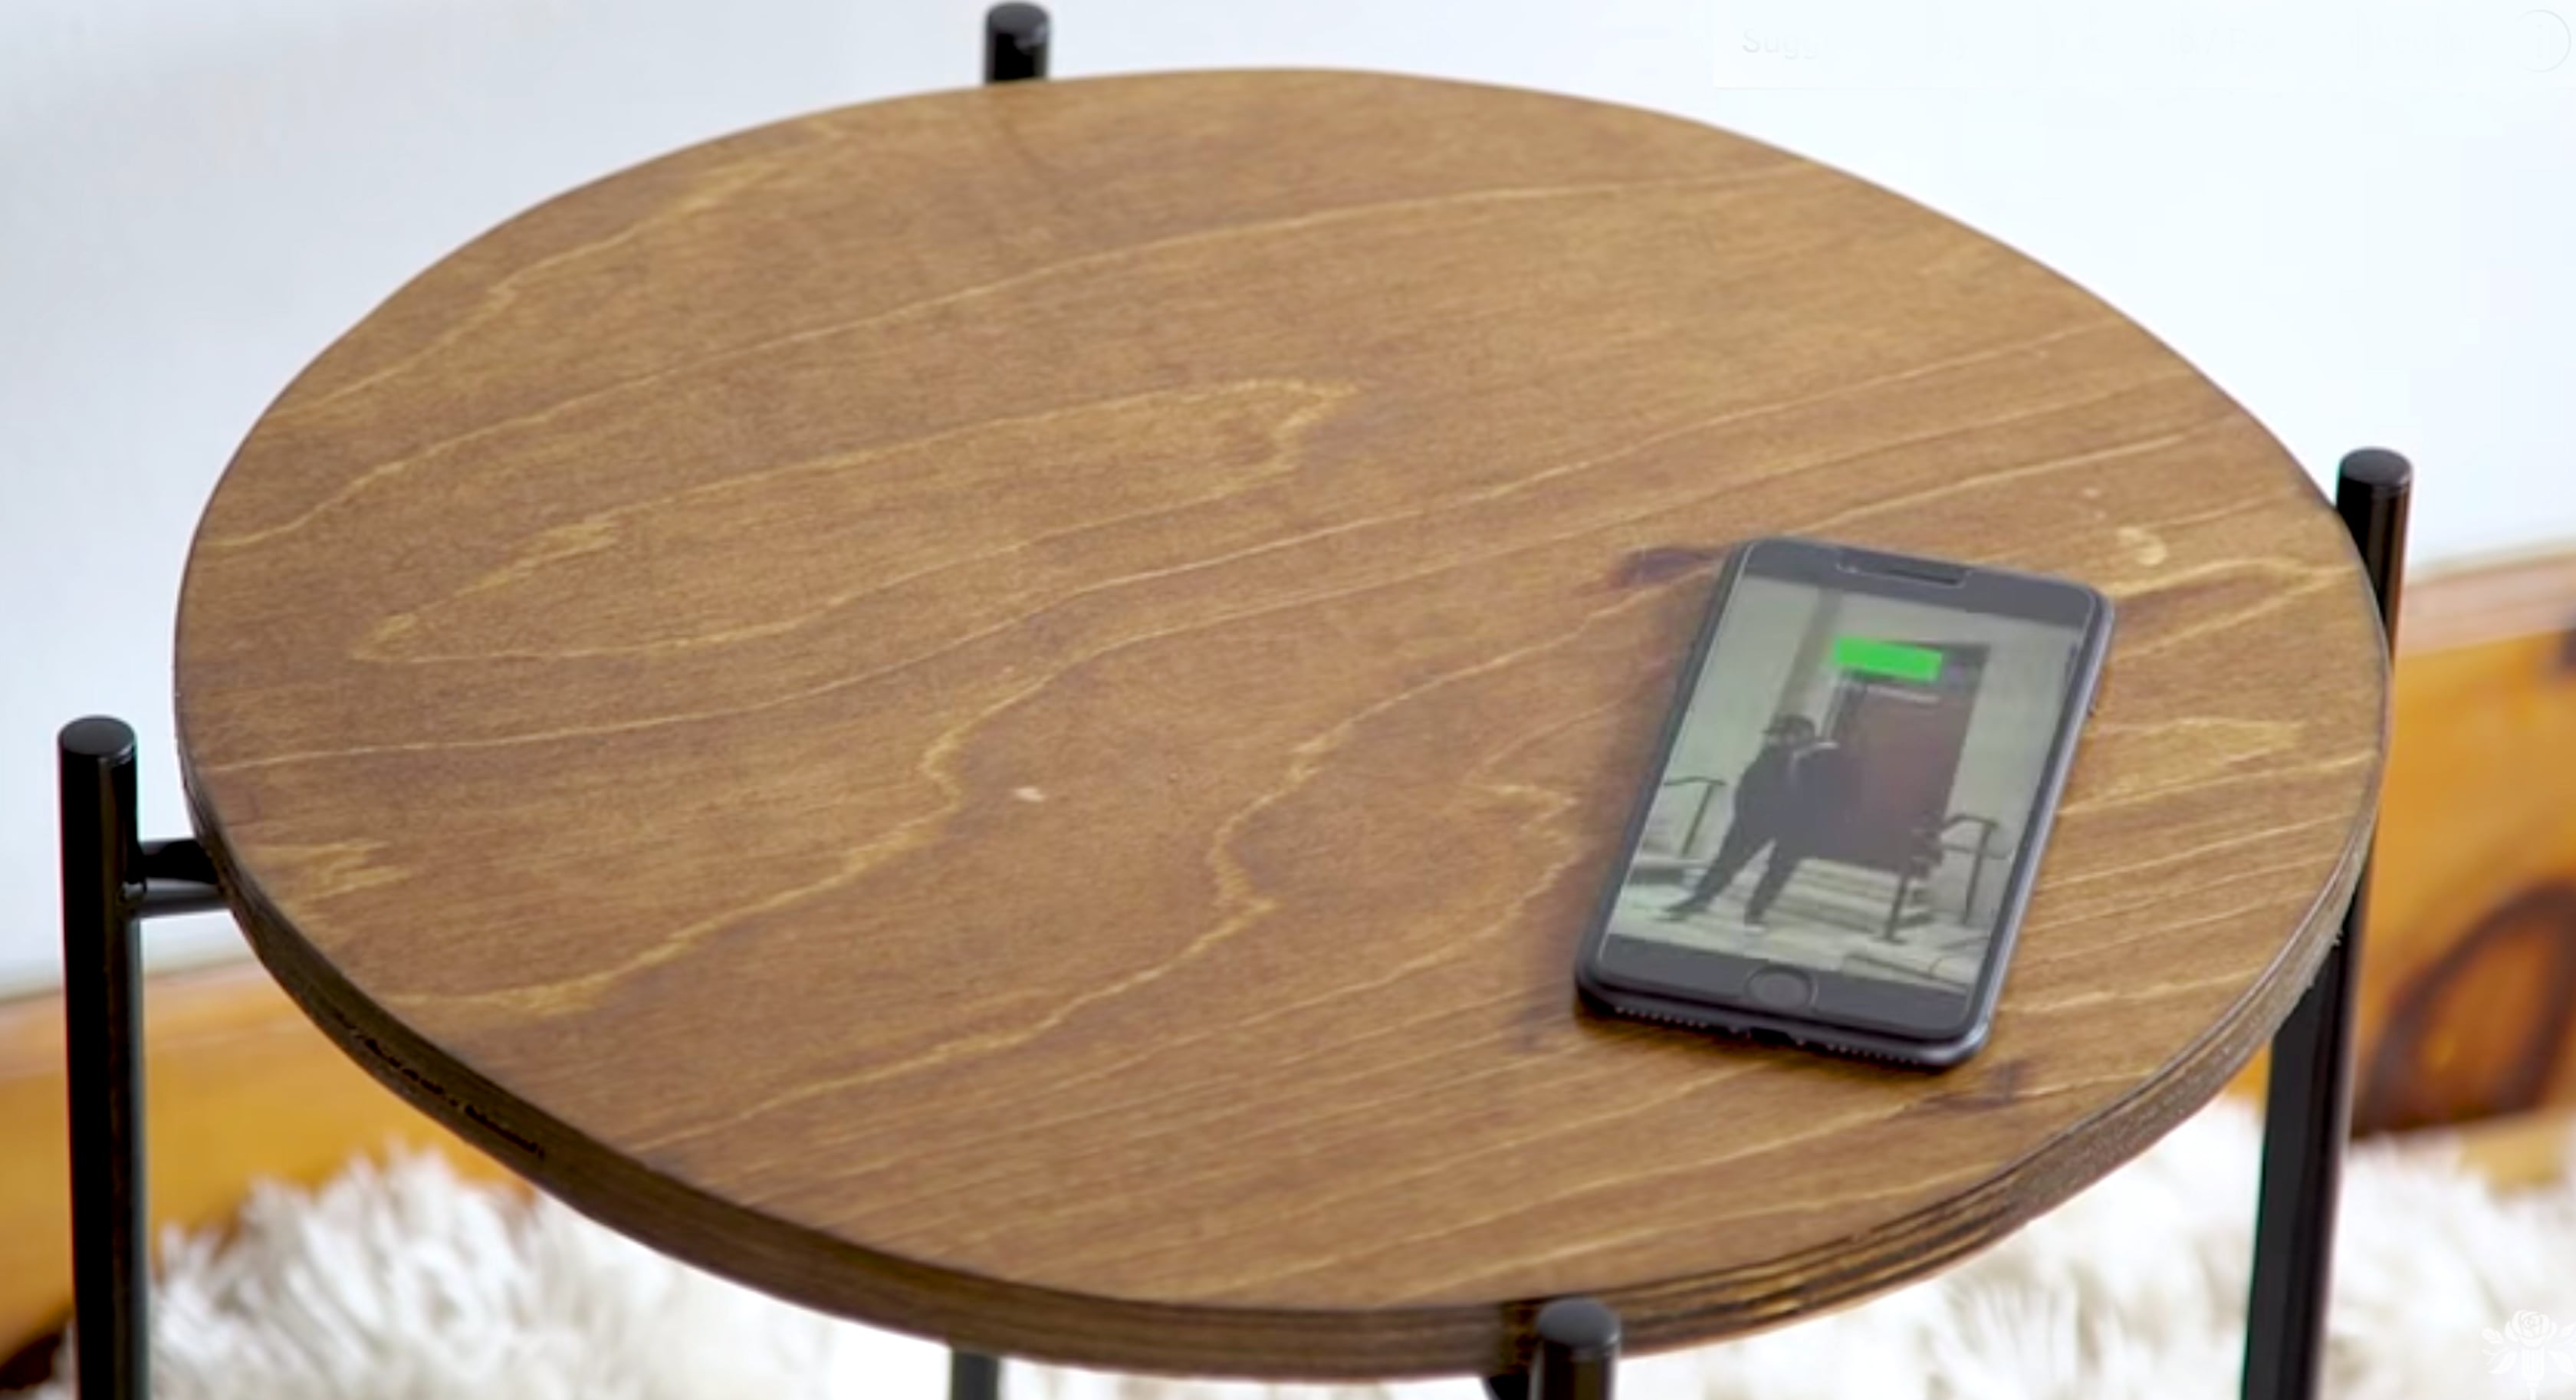 Wireless Charging Table Lets You Charge Your Phone In Style - DIY Ways